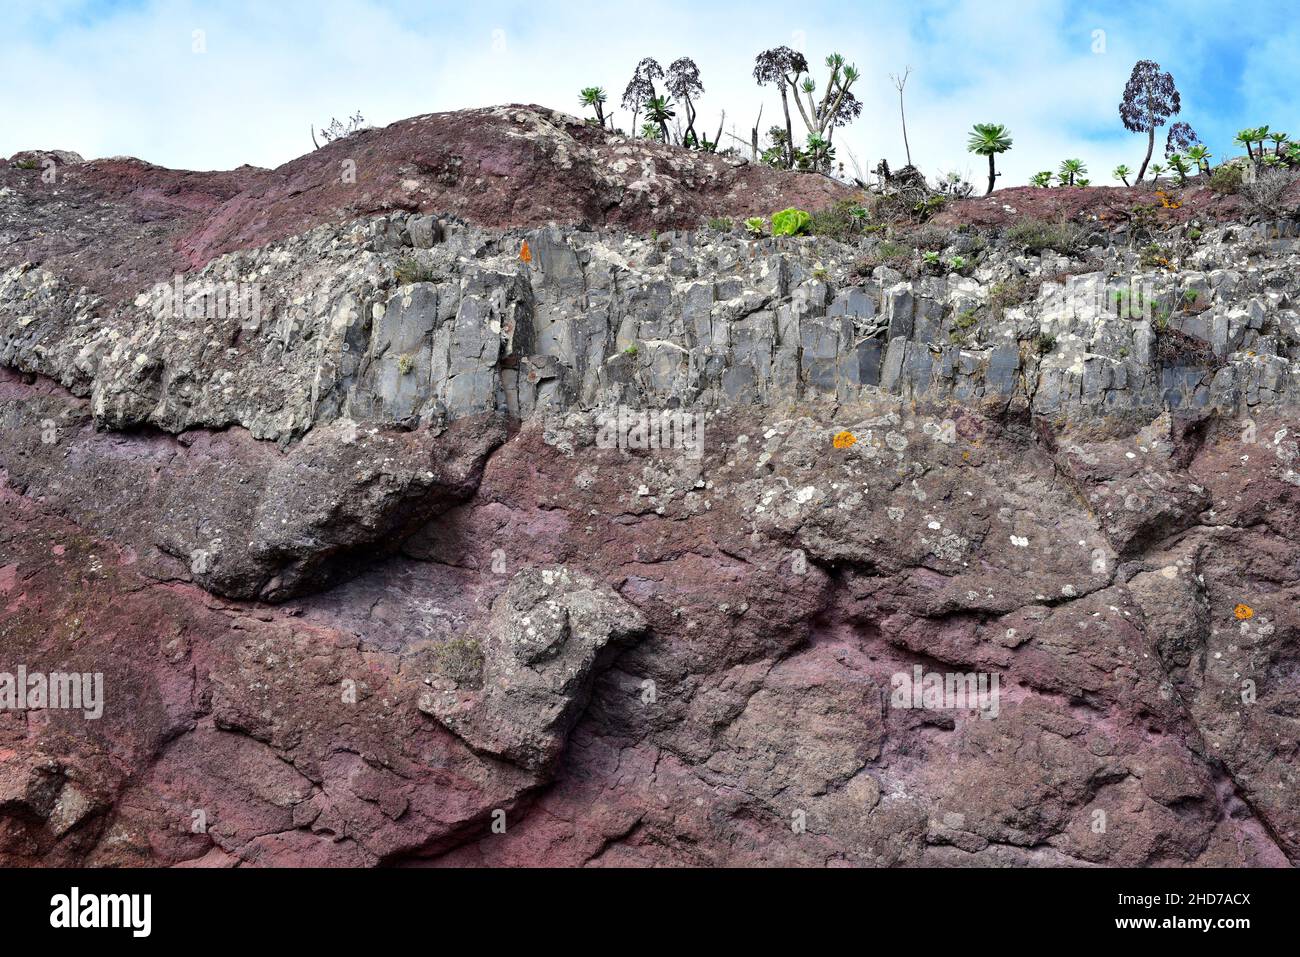 Overlapping of differents lava flows. Anaga Peninsula, Tenerife, Canary Islands, Spain. Stock Photo